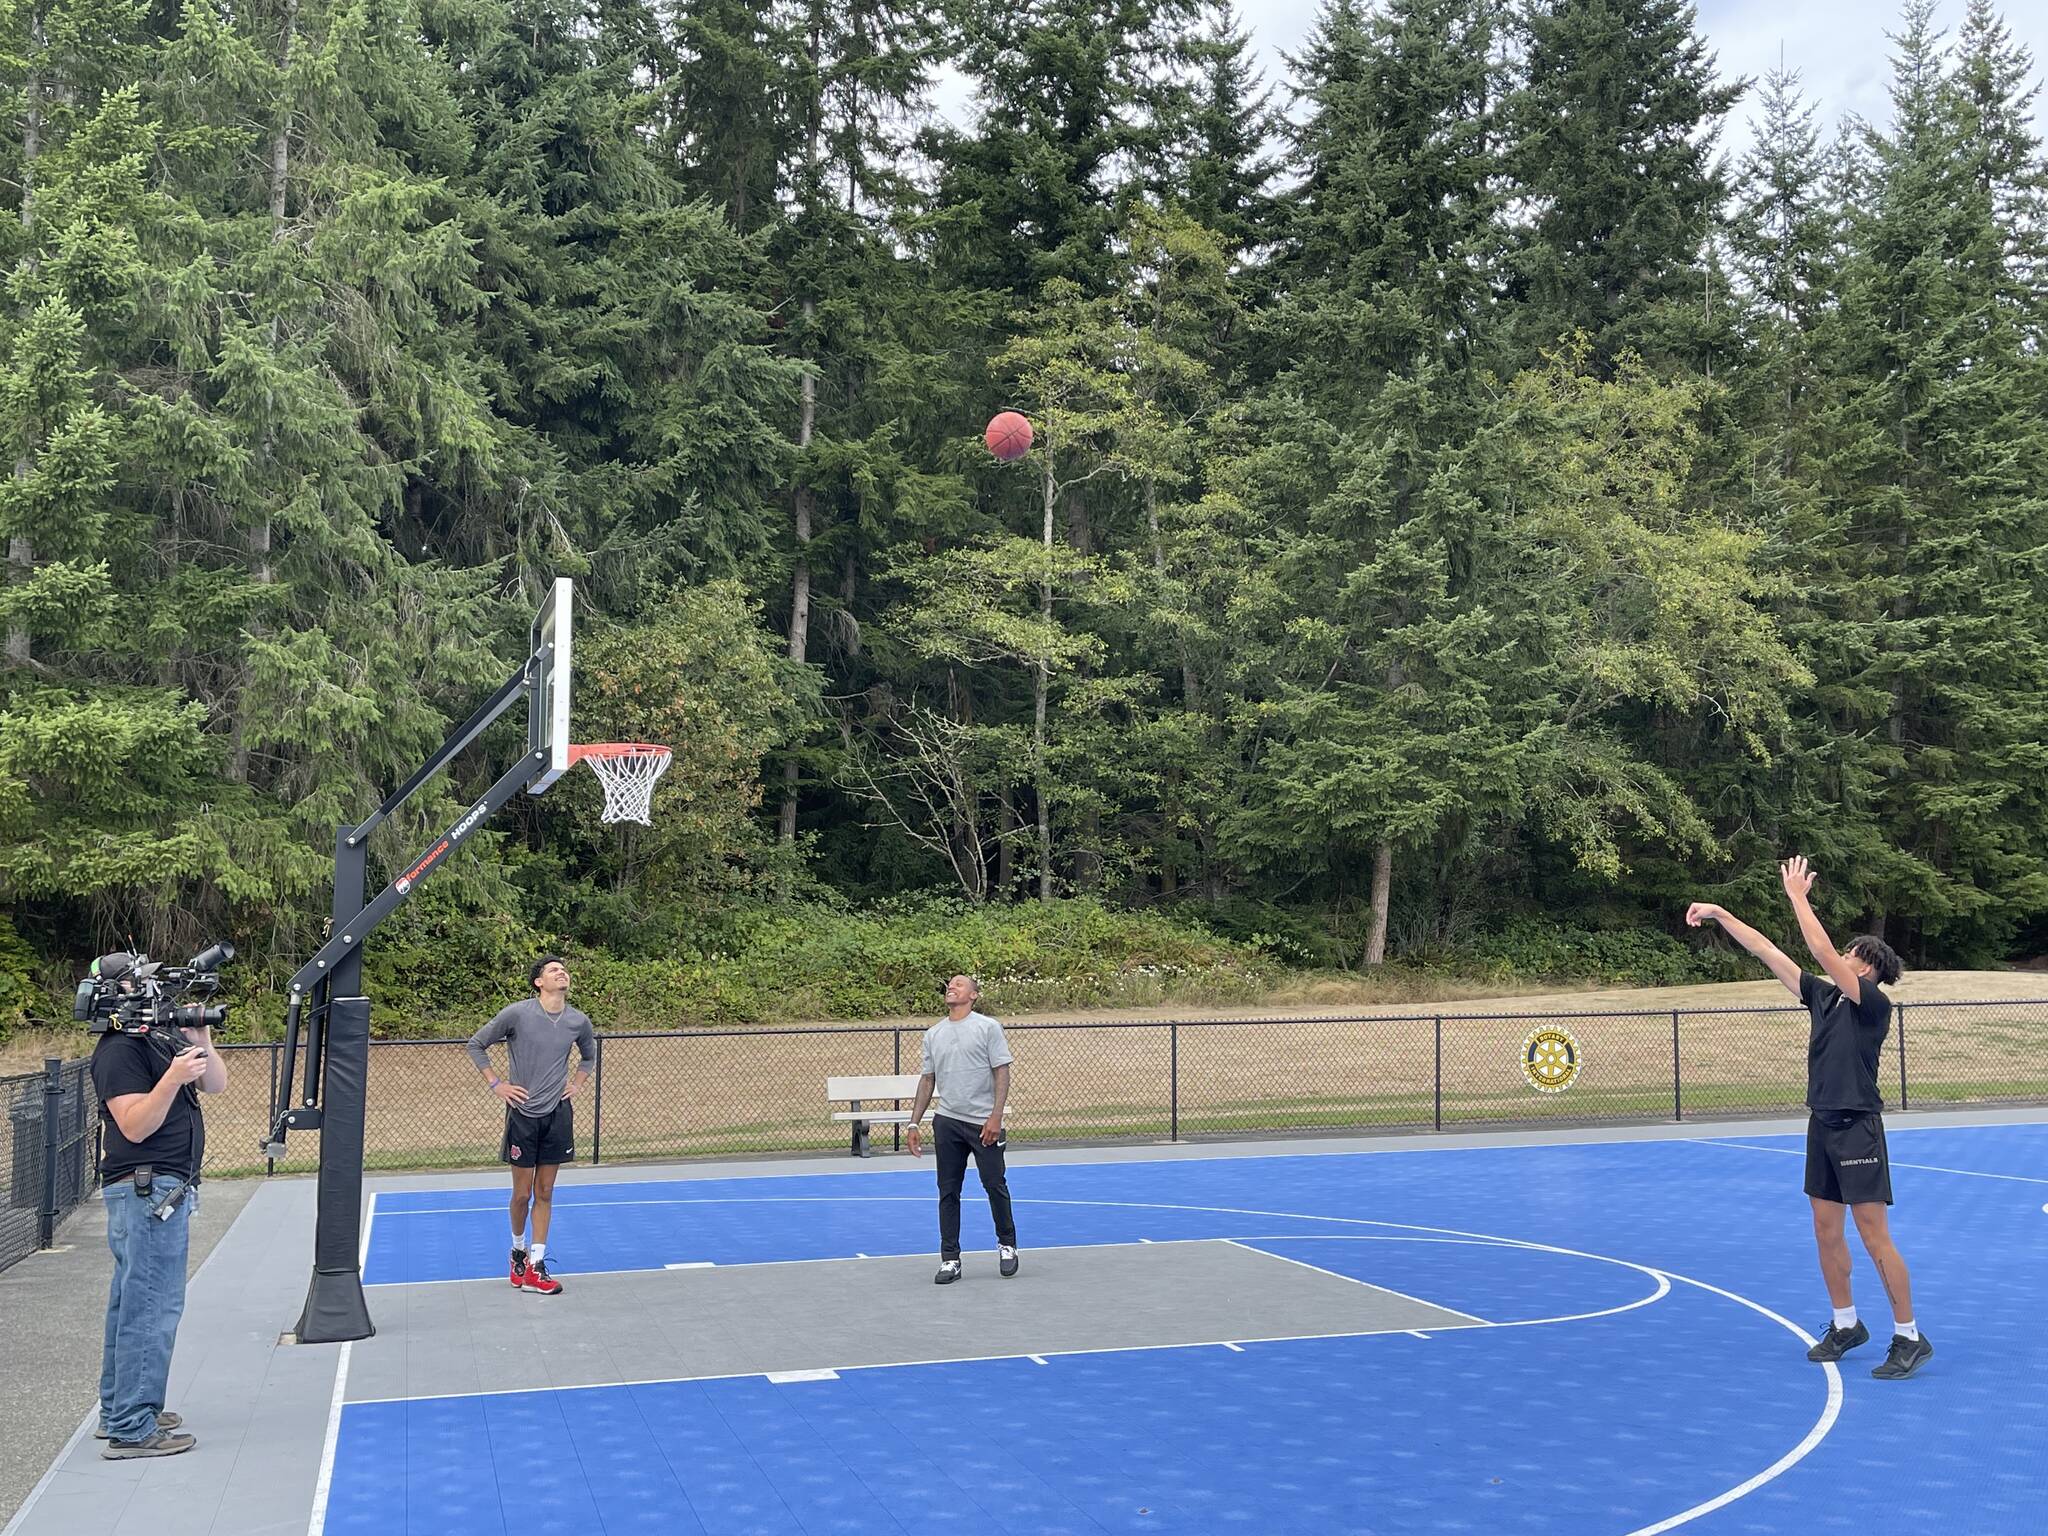 Photo provided
Filming for the Whidbey episode of Bleacher Report took place over the span of one day at a bright blue court in South Whidbey Community Park.